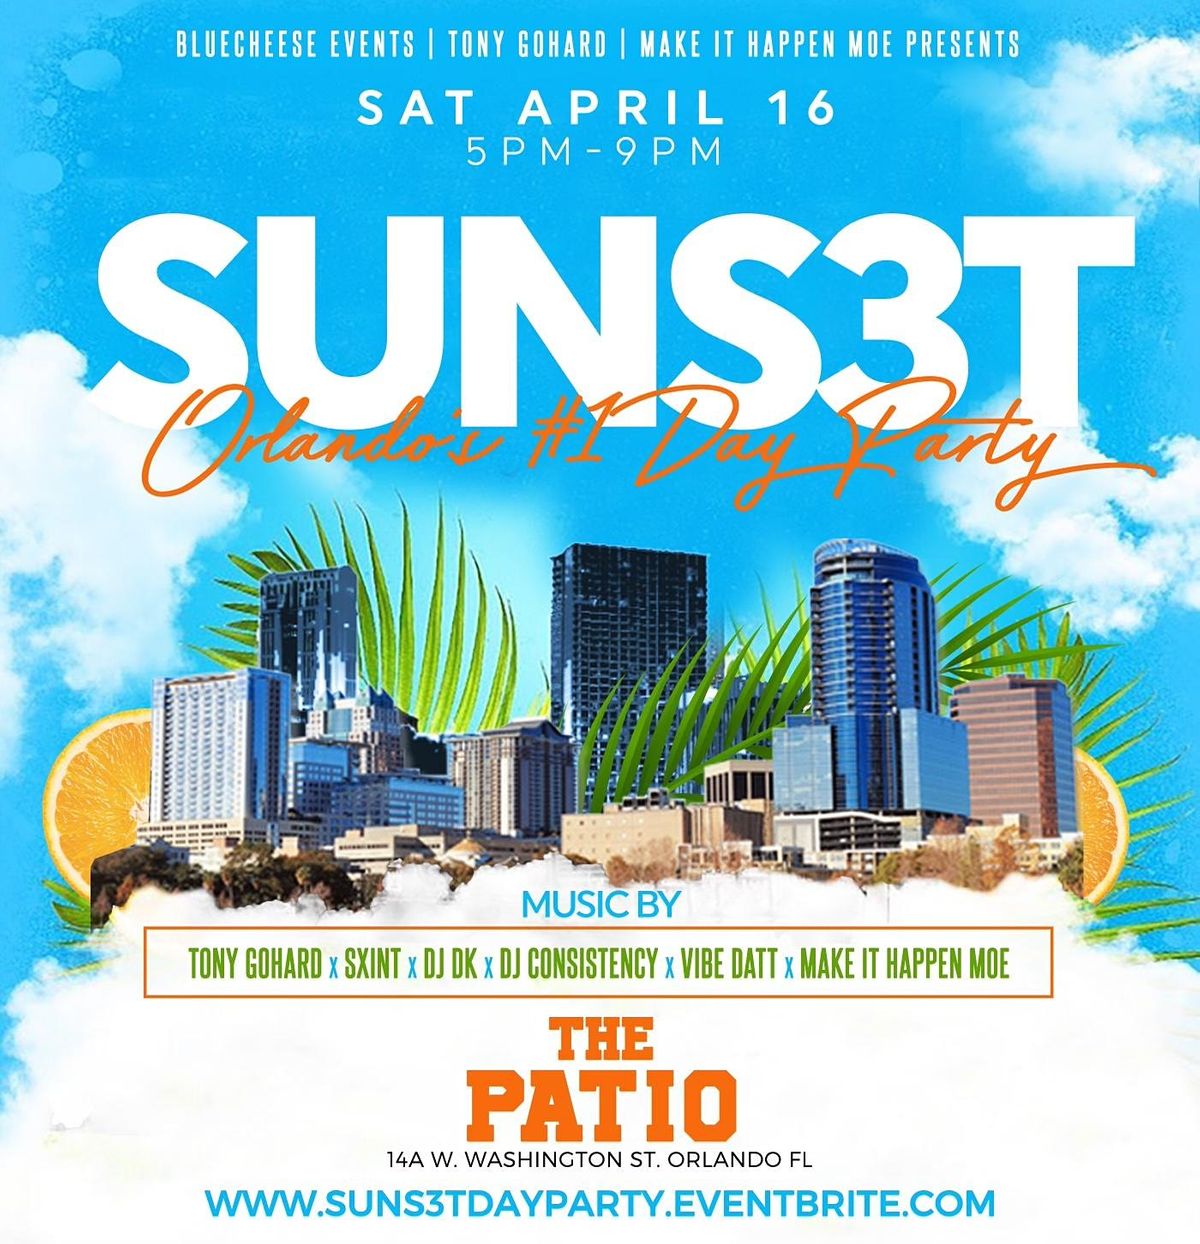 SUNS3T DAY PARTY AT THE PATIO